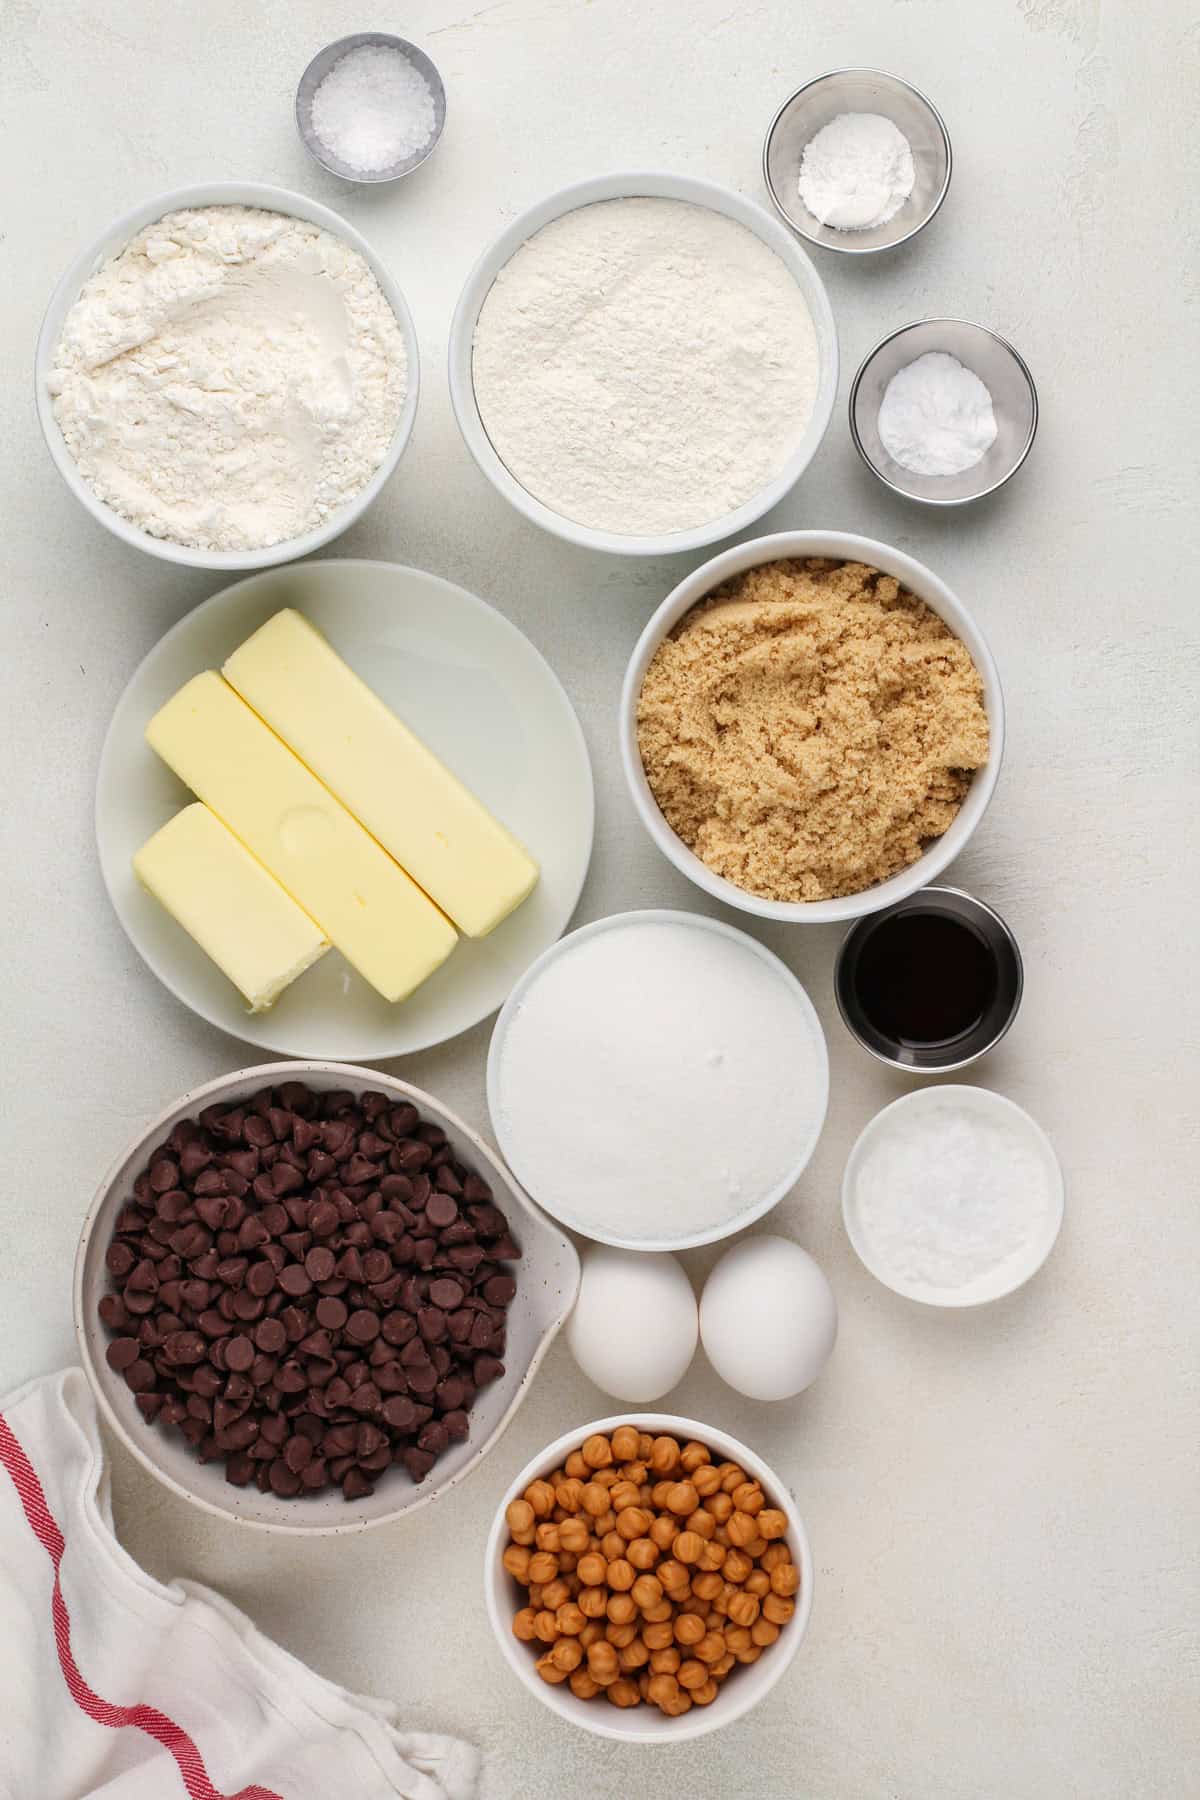 Ingredients for salted caramel chocolate chip cookies arranged on a countertop.